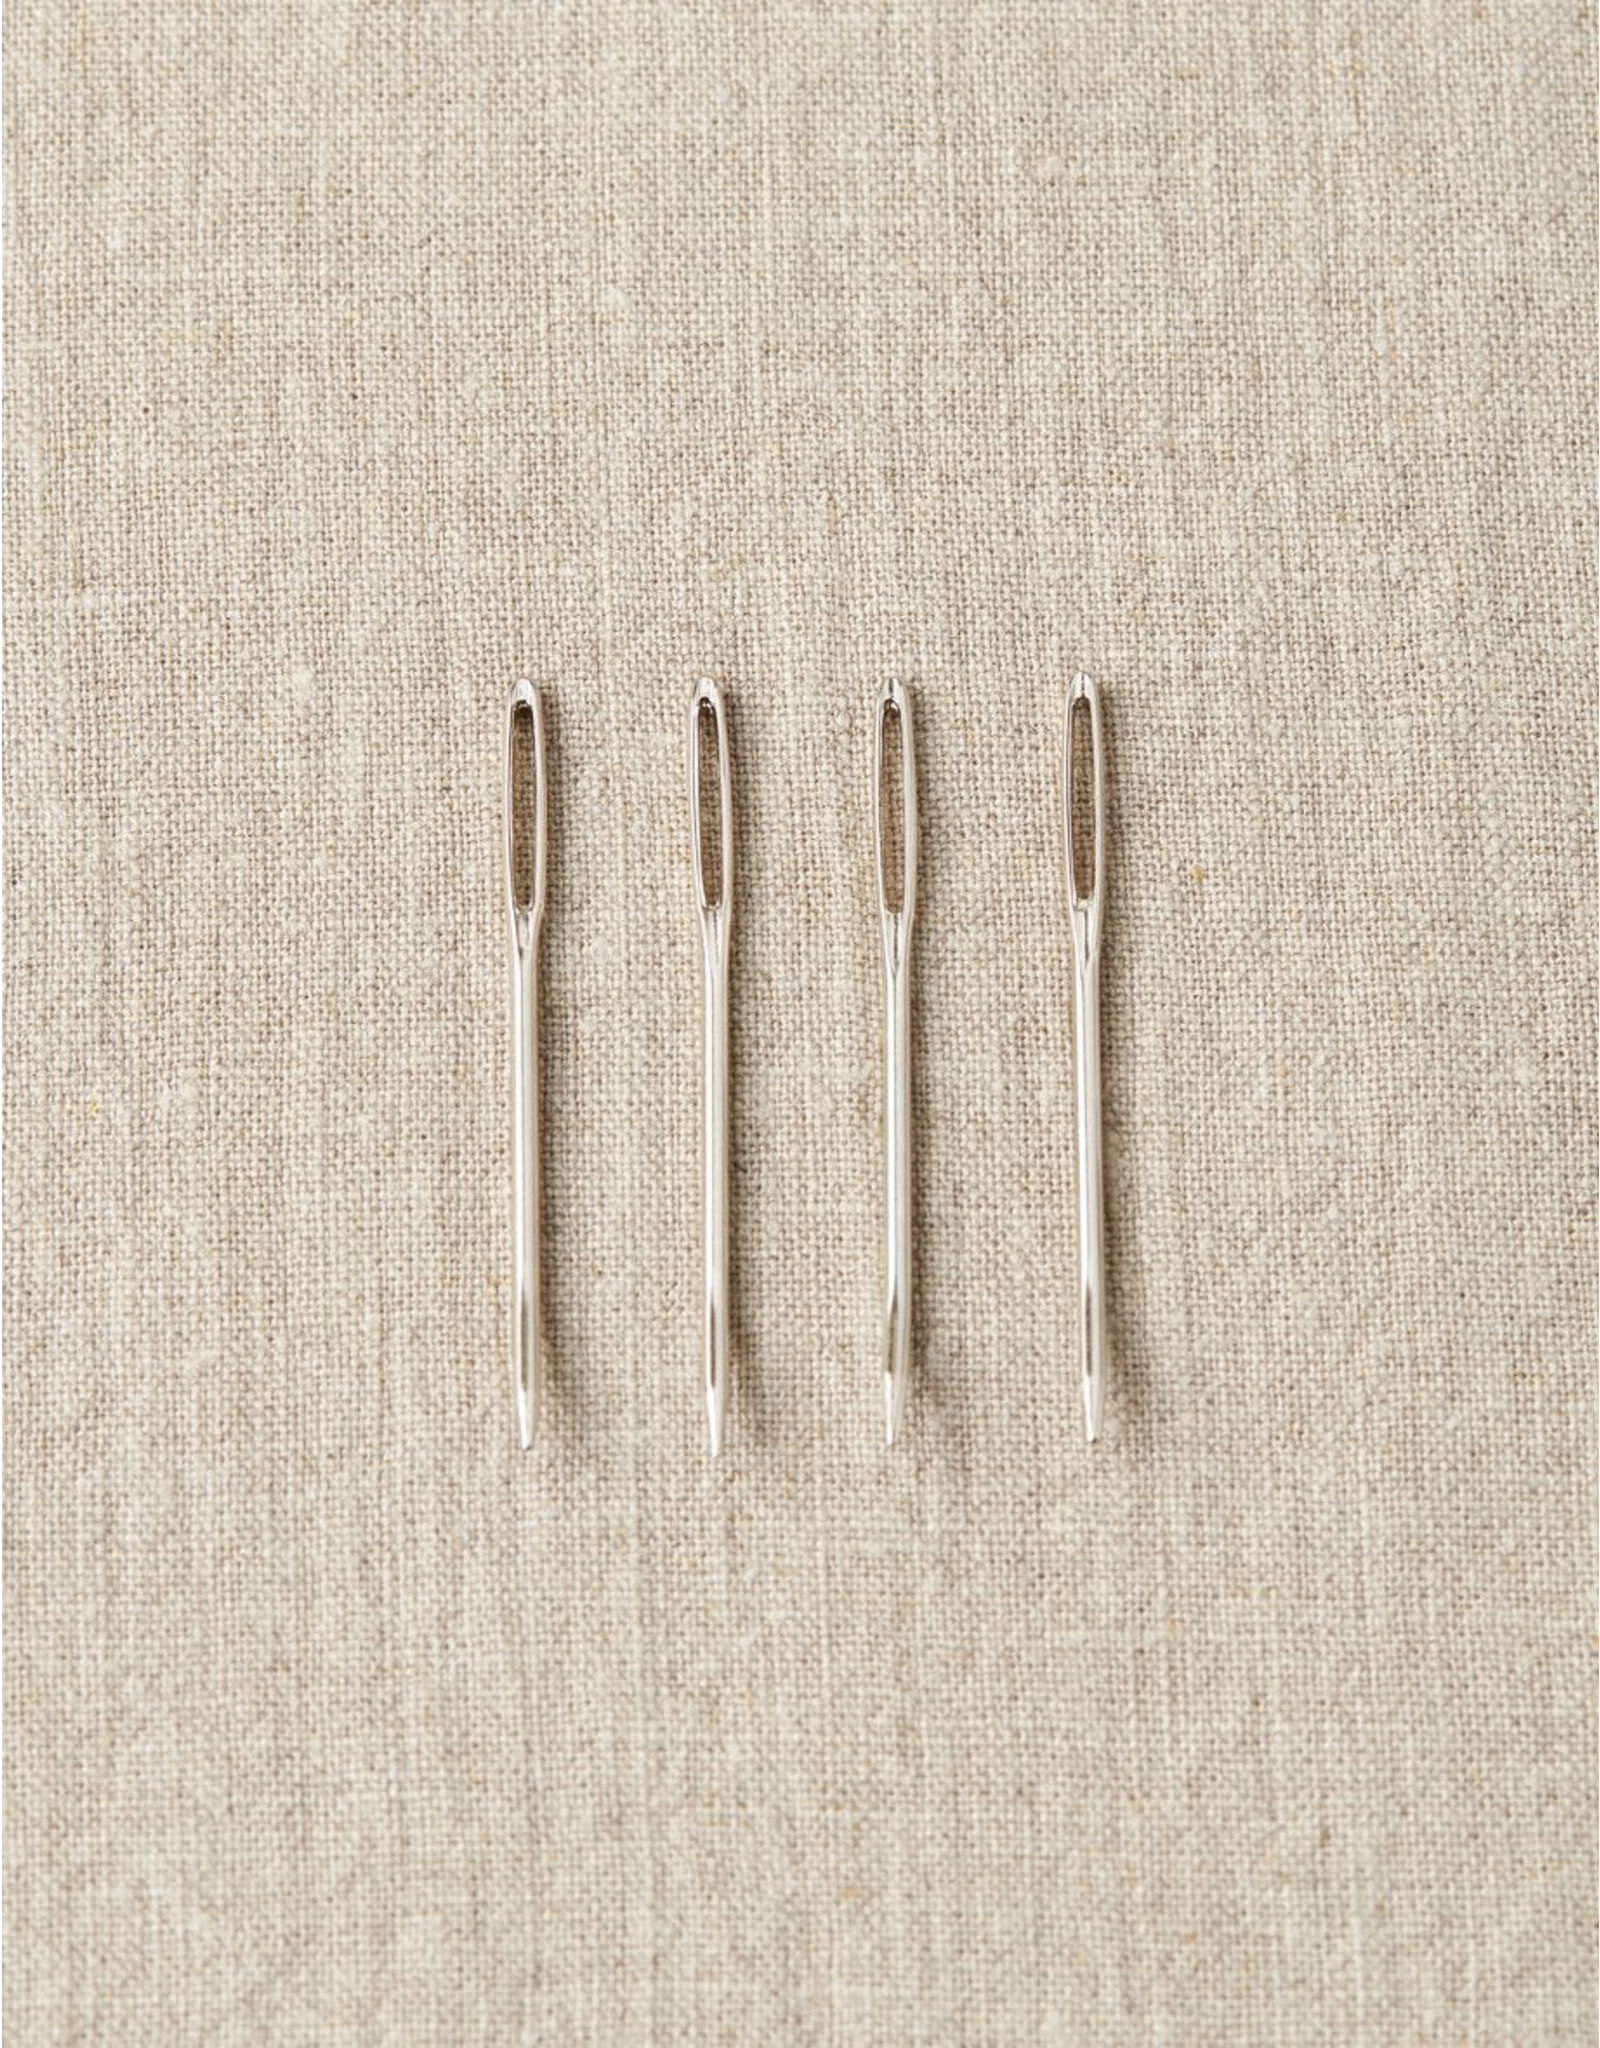 CoCo Knits Cocoknits Tapestry Needles